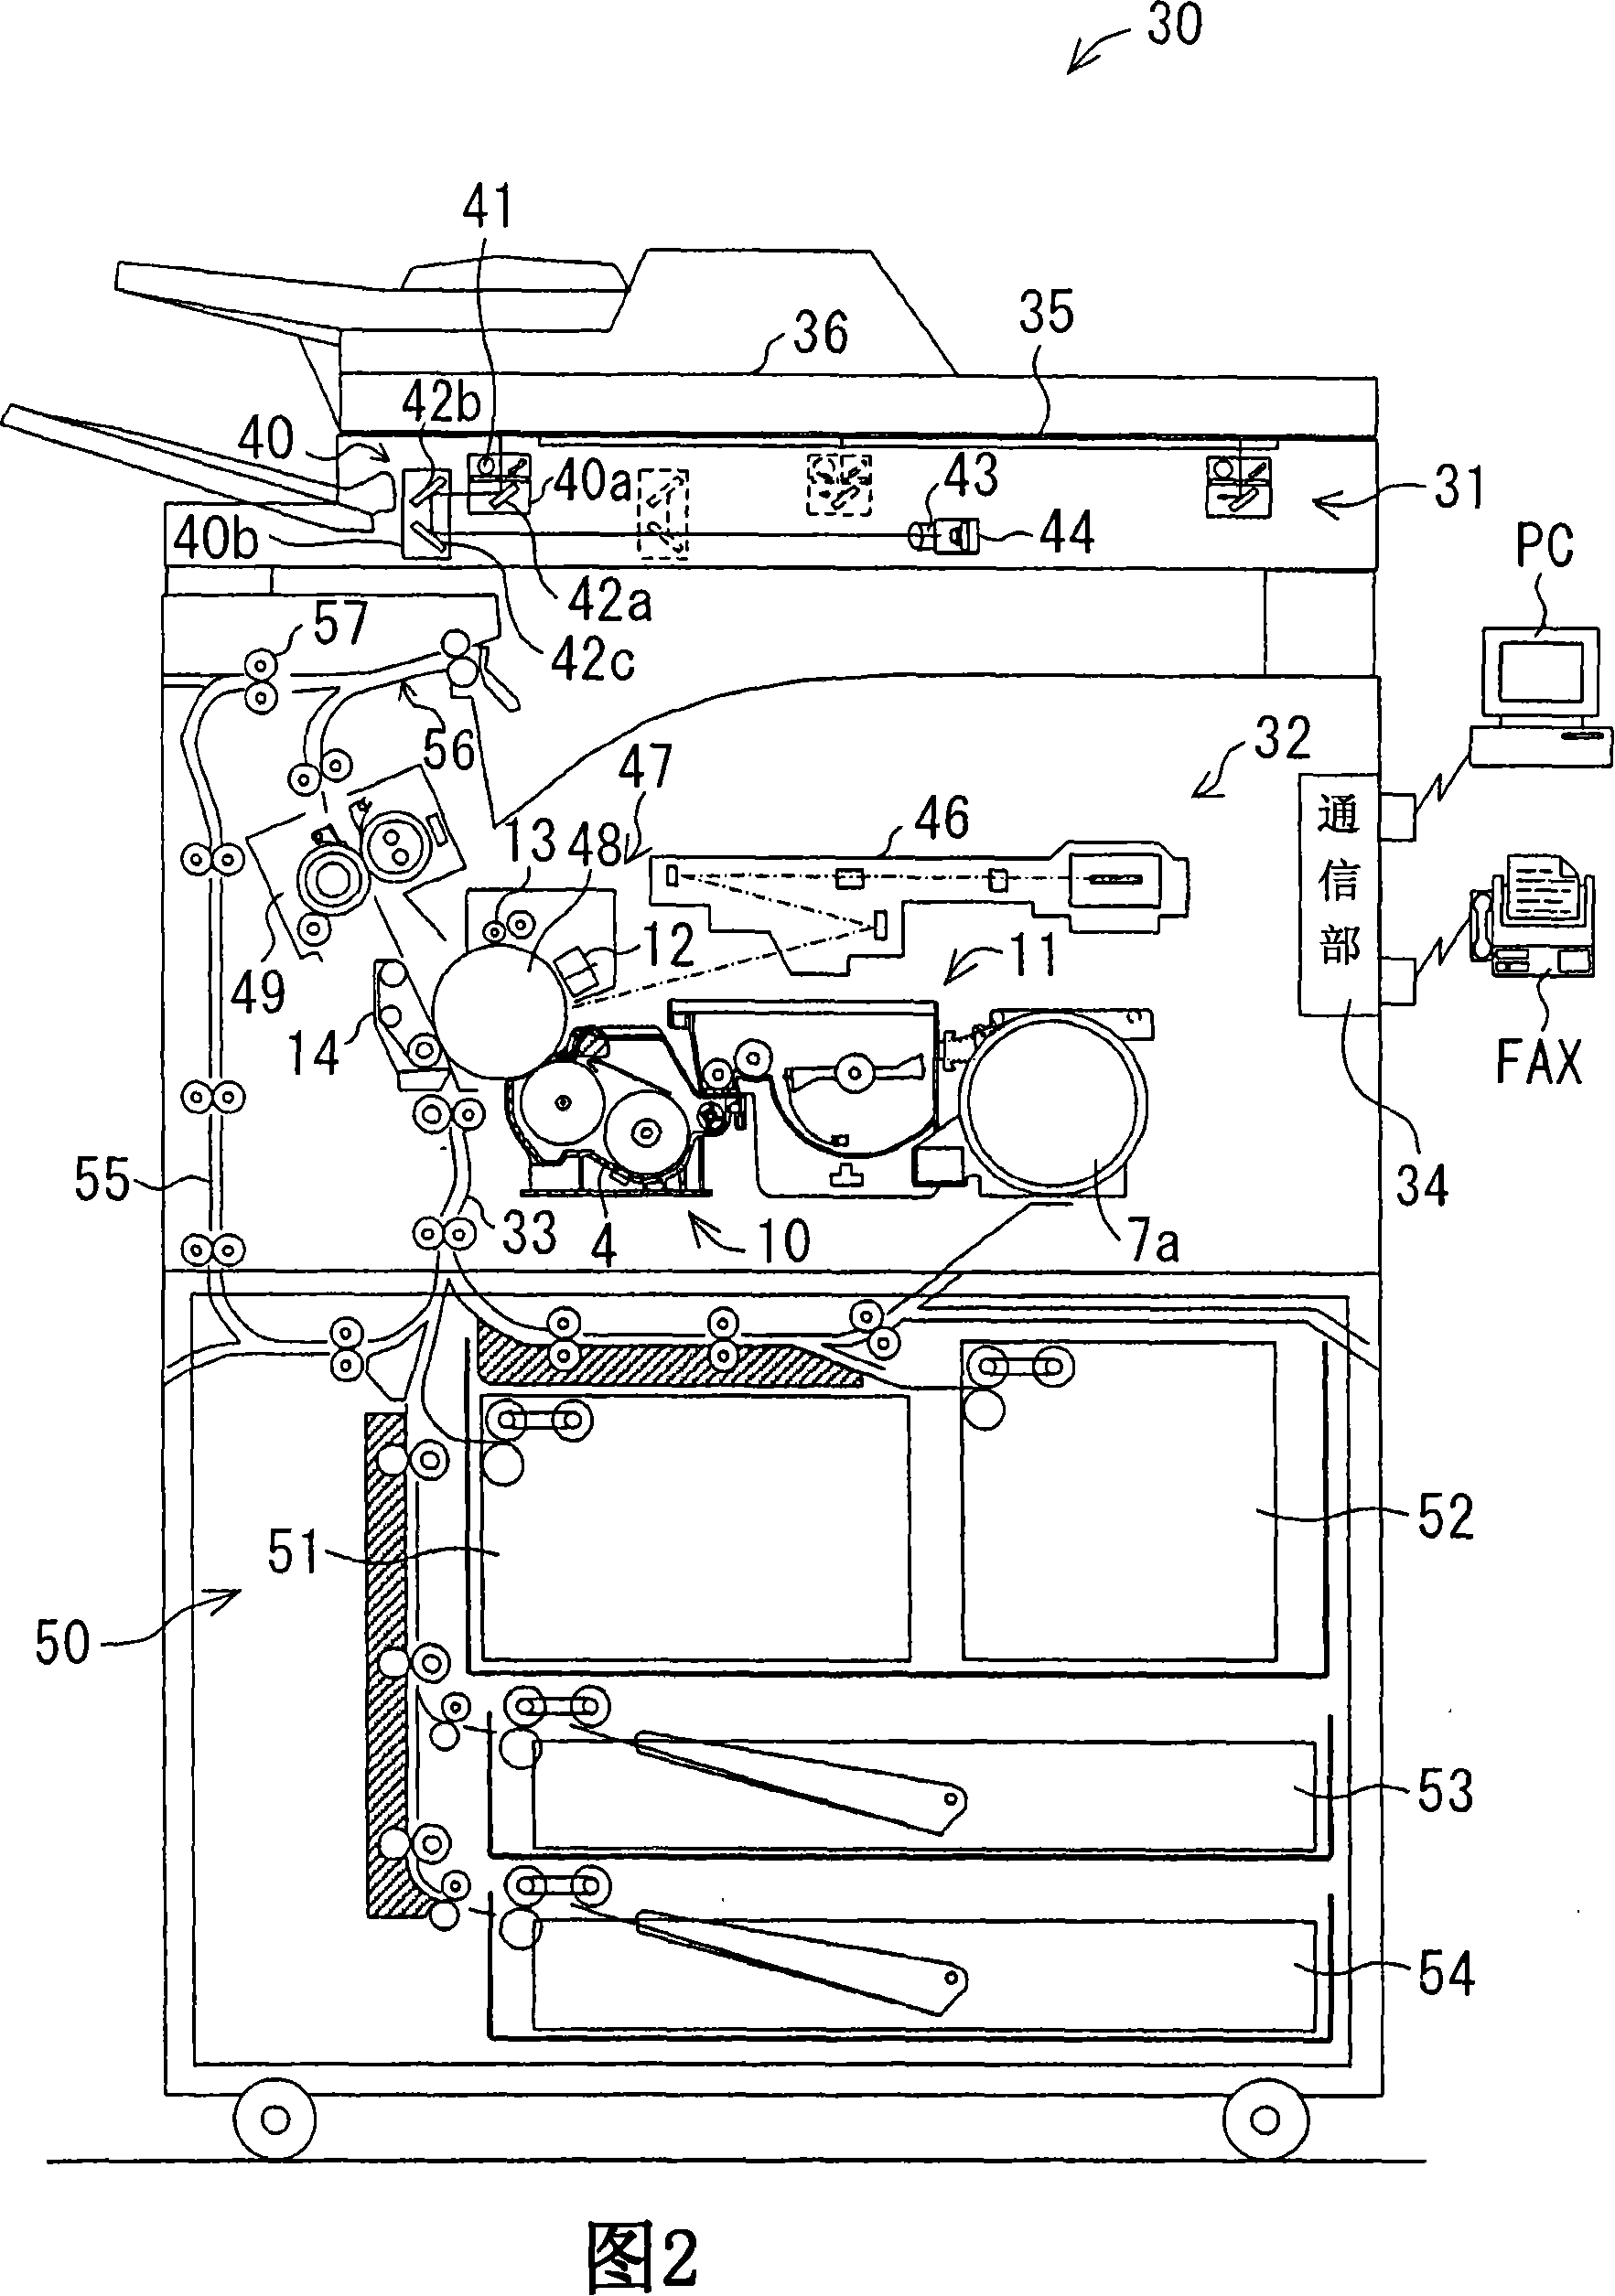 Toner replenishing device and image forming apparatus